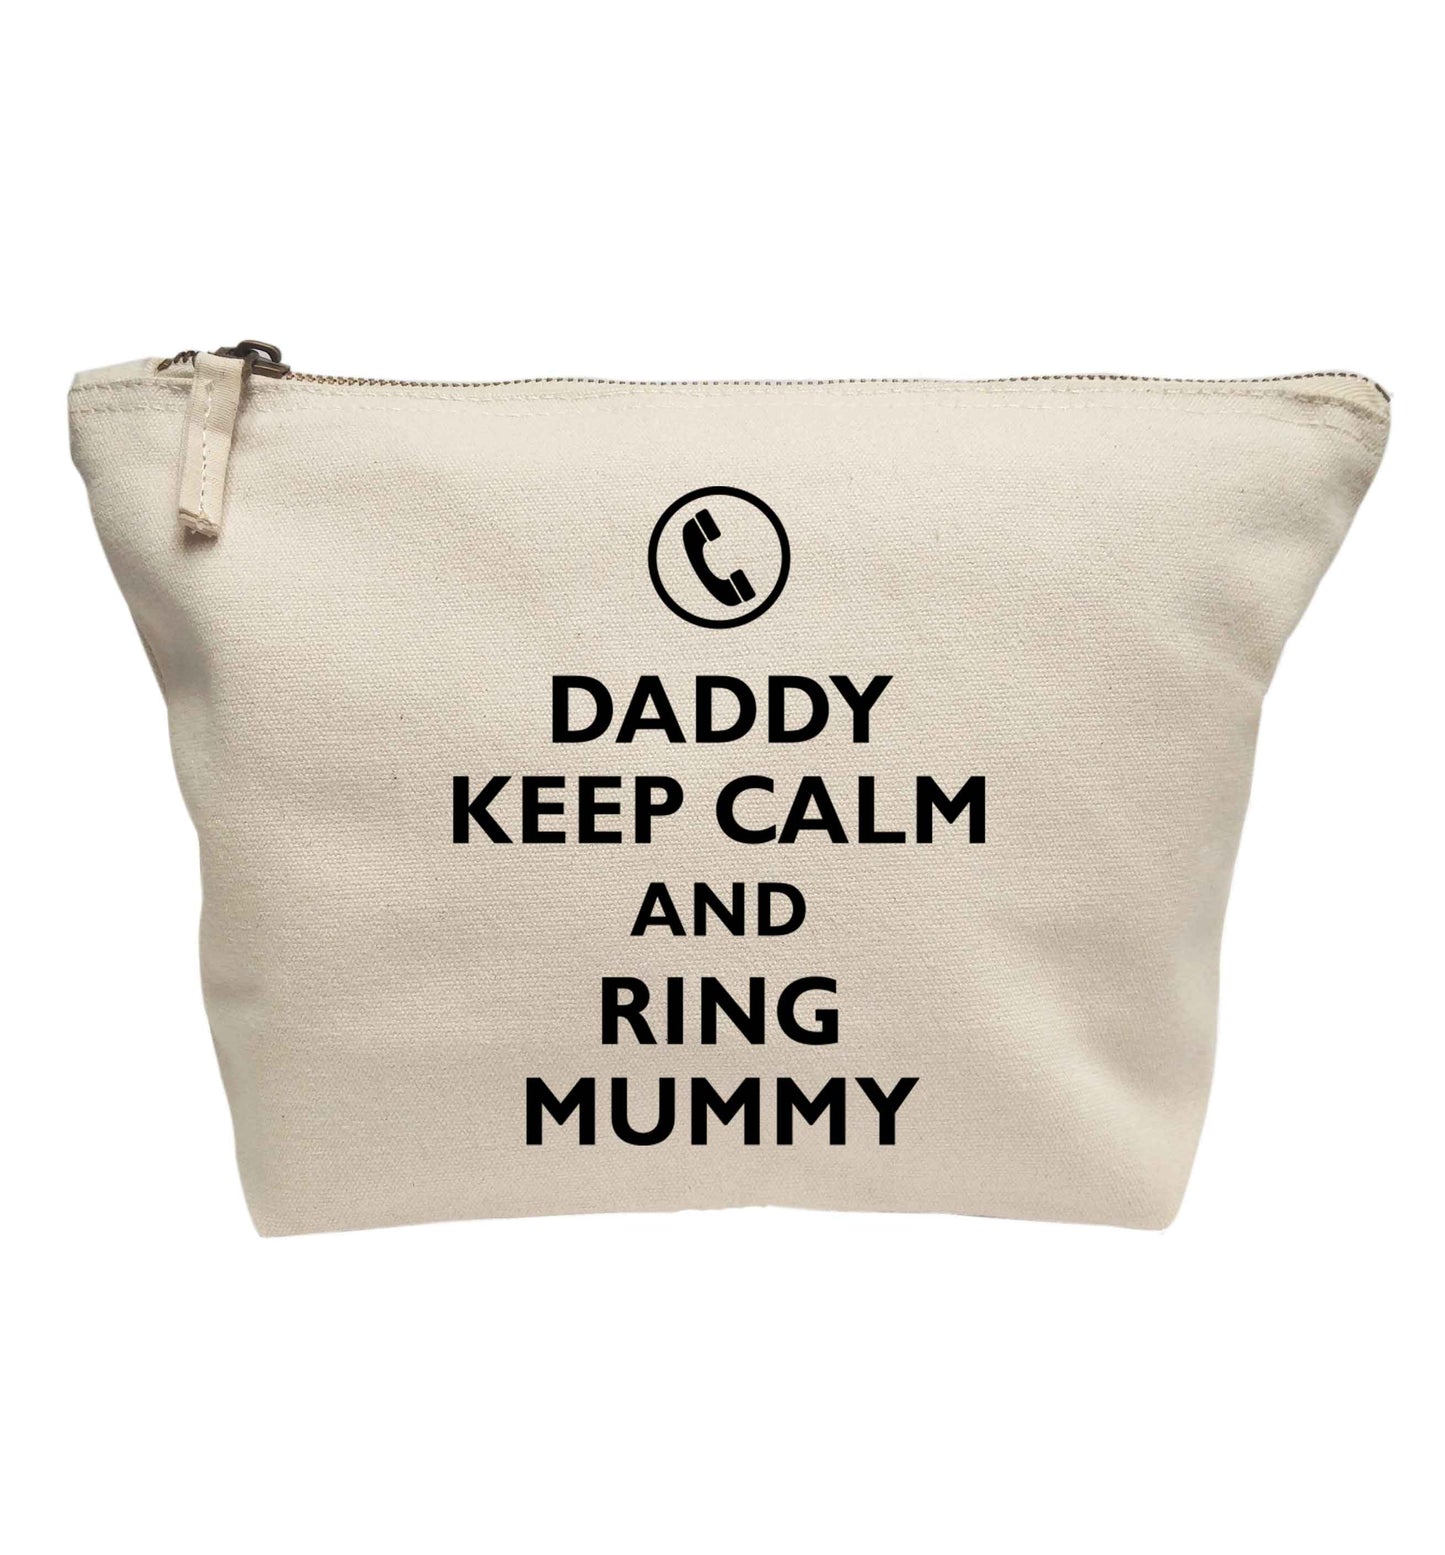 Daddy keep calm and ring mummy | Makeup / wash bag